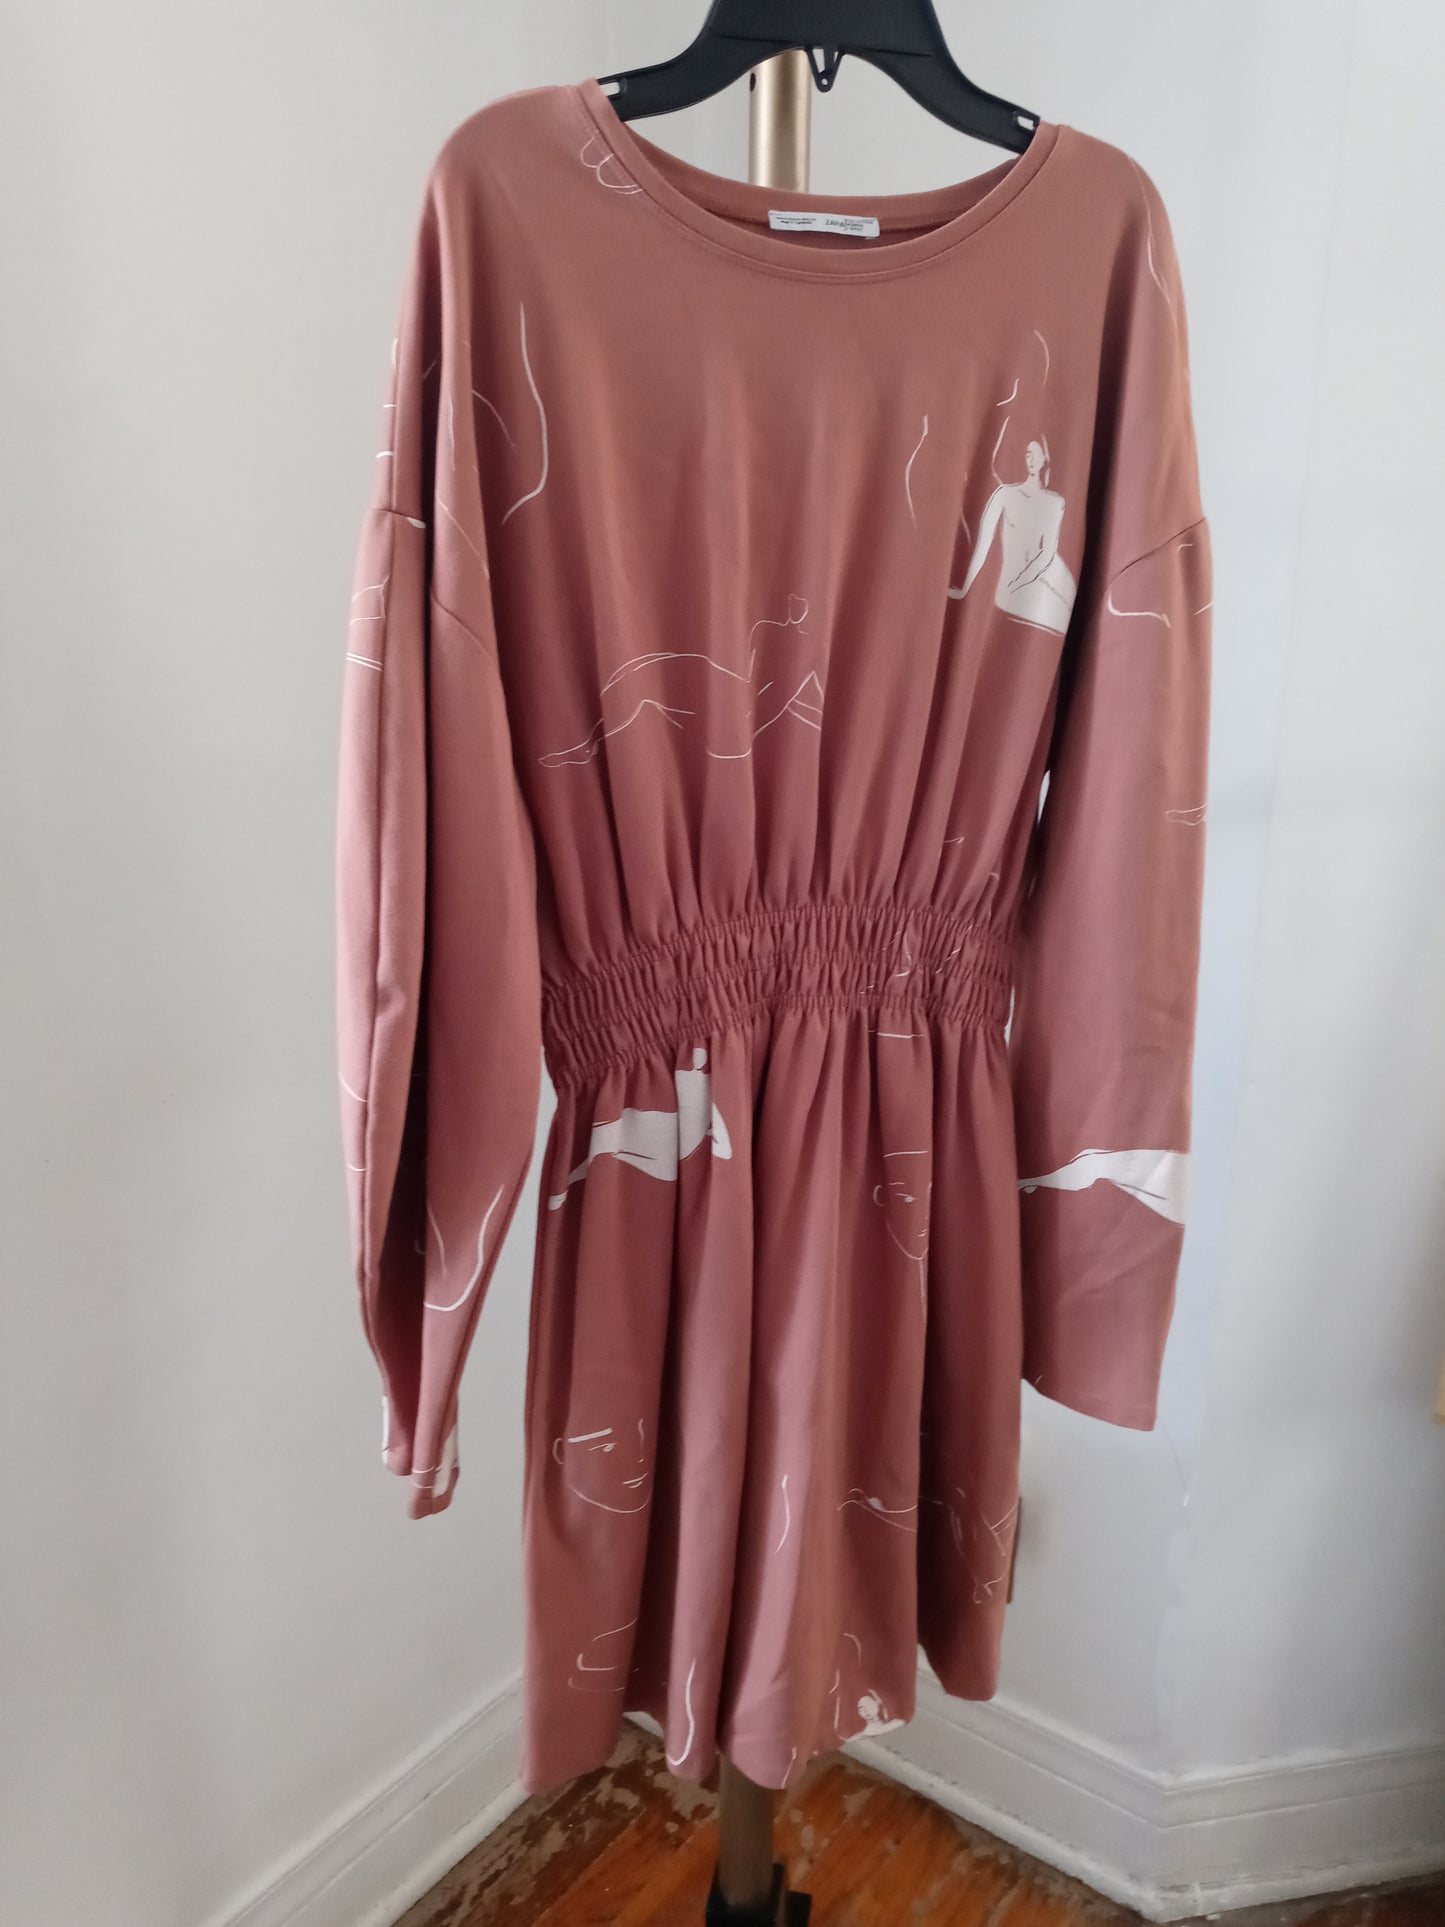 Zara dusty pink long sleeve dress with abstract line drawing of female